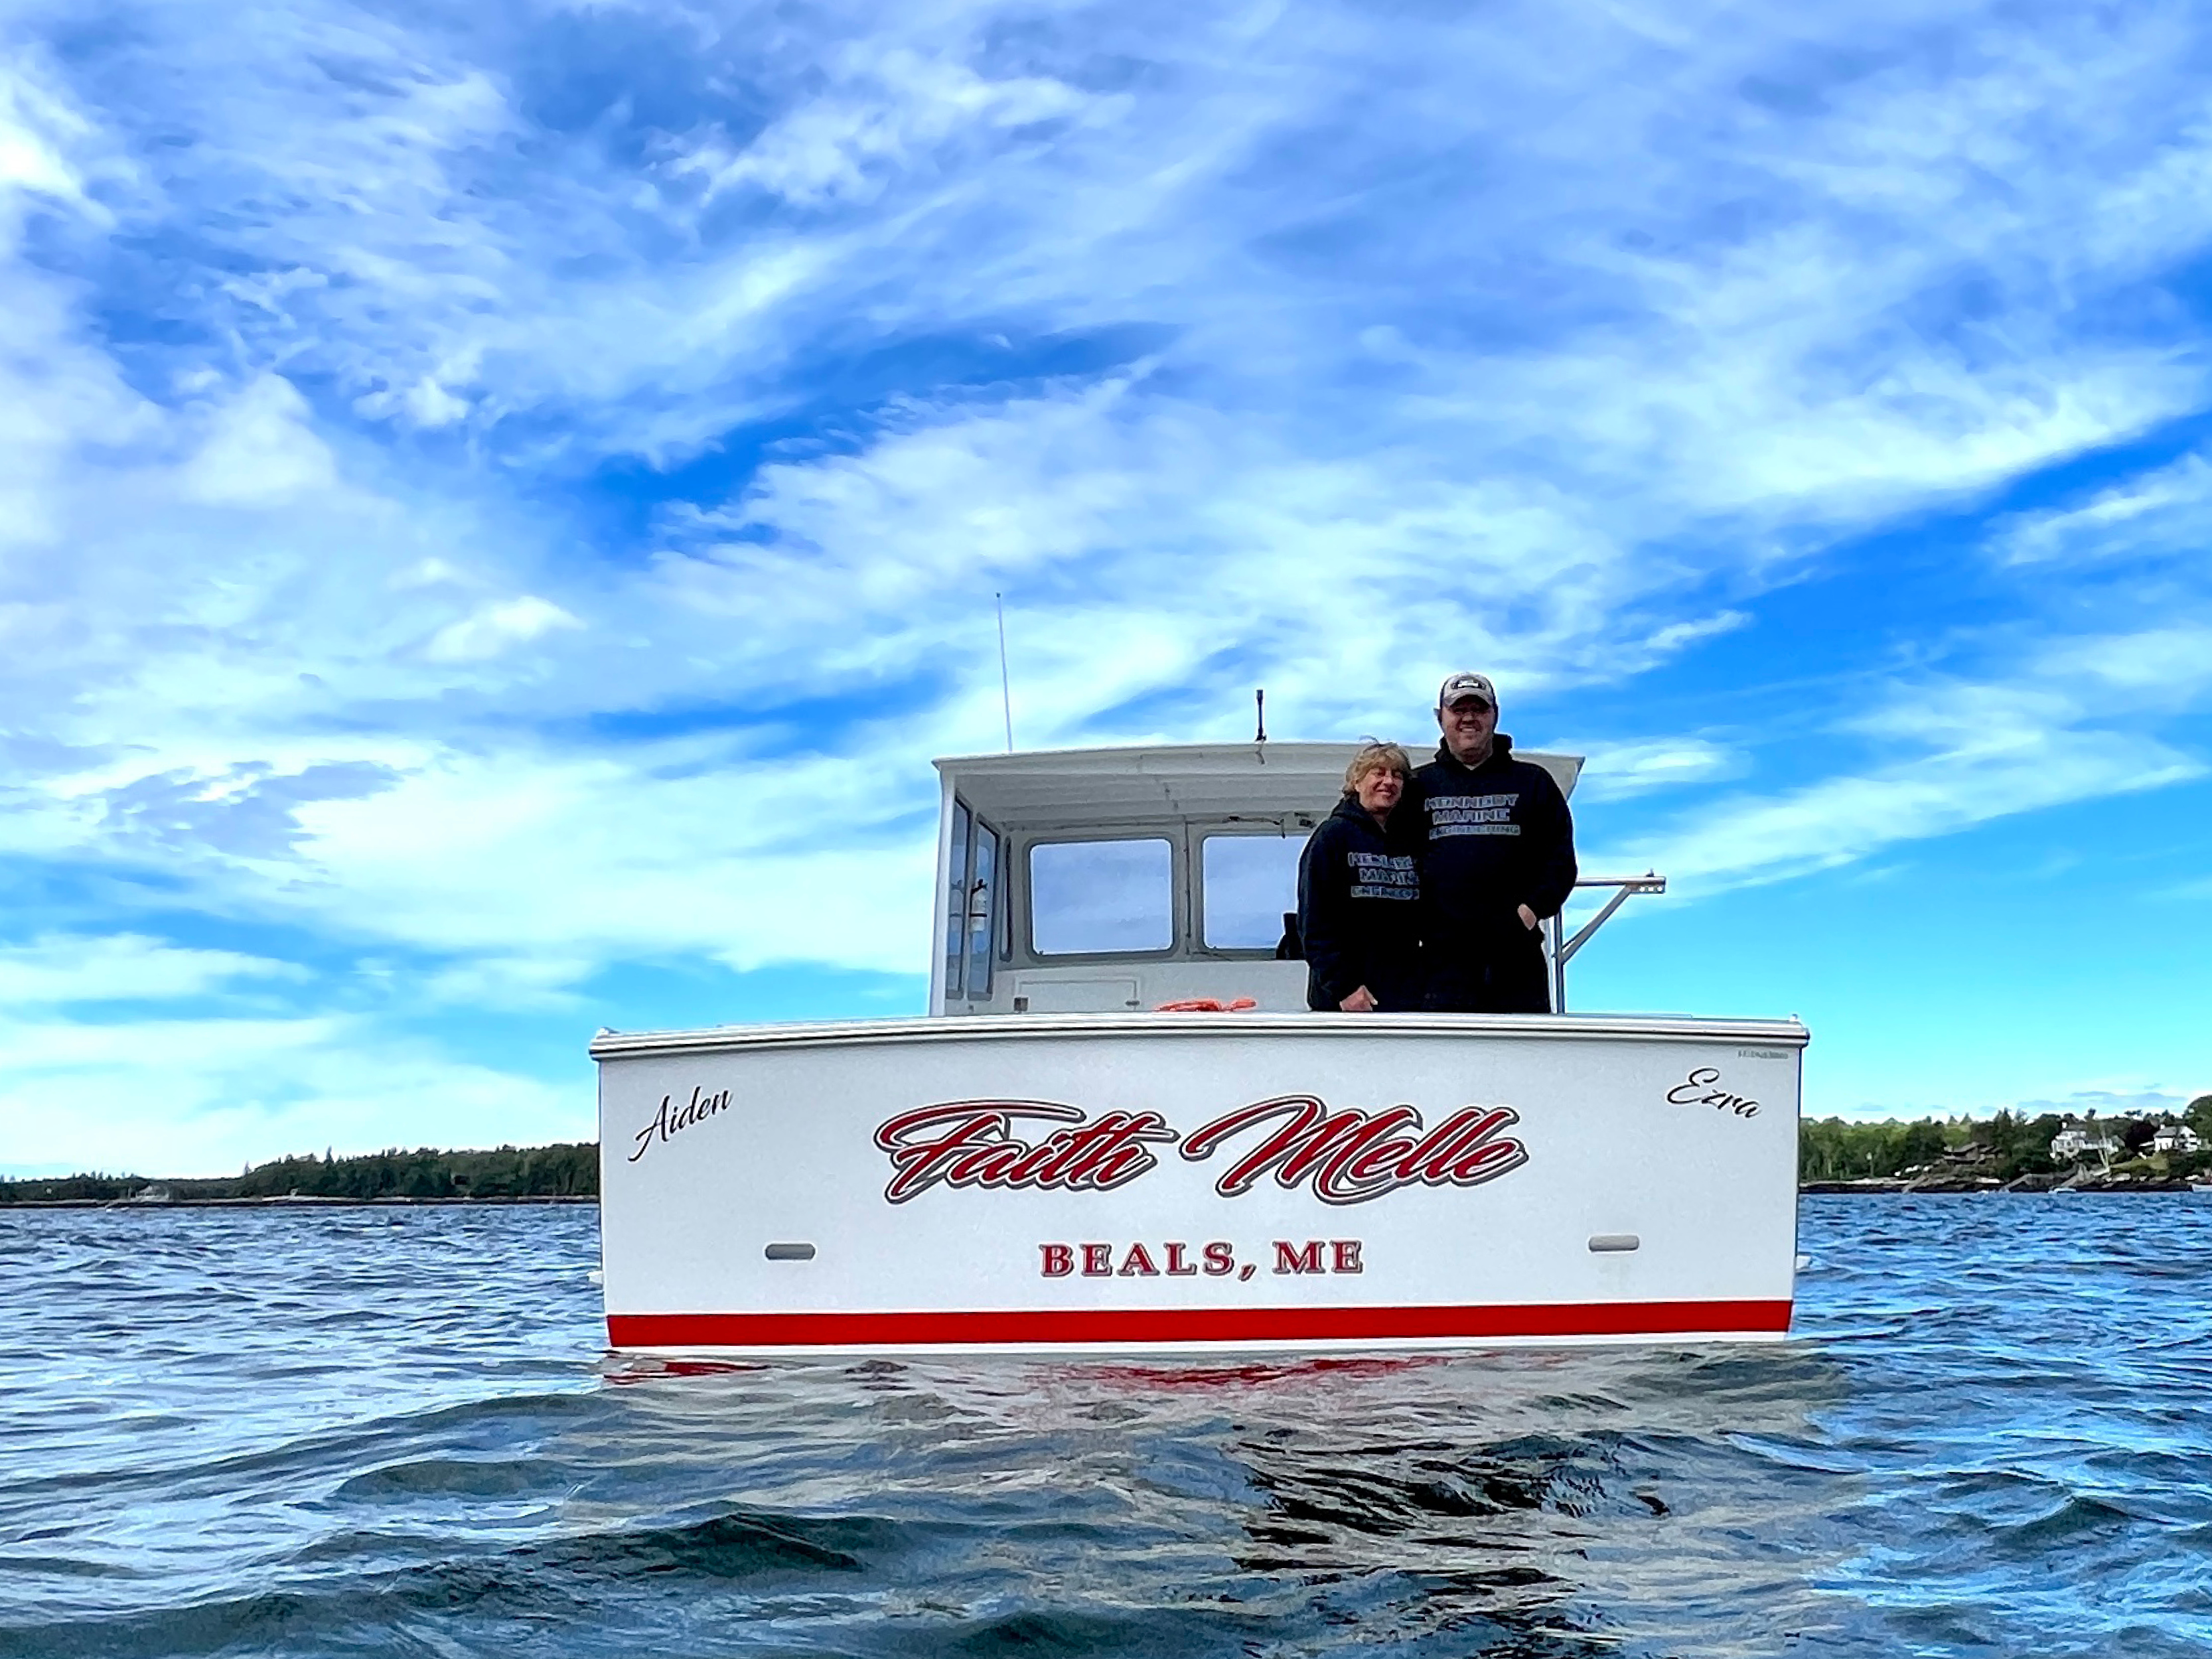 Some Maine lobstermen build their boats more for racing than fishing